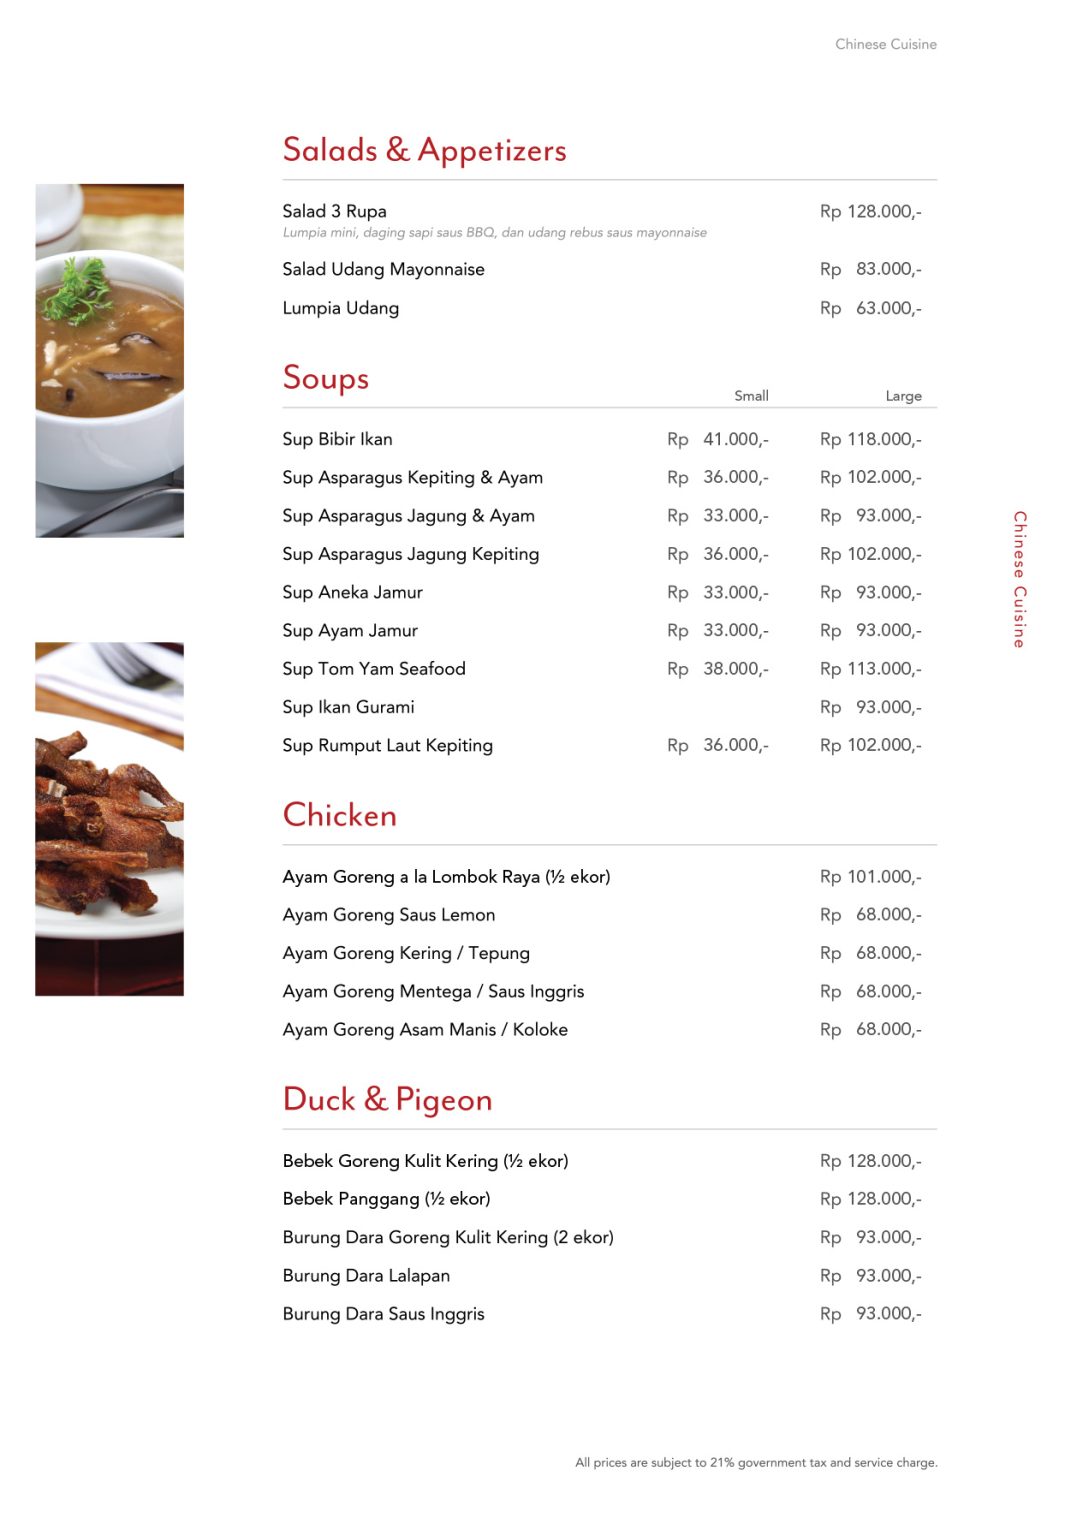 In-room - Chinese Cuisine - Salads, Soups, Main Course